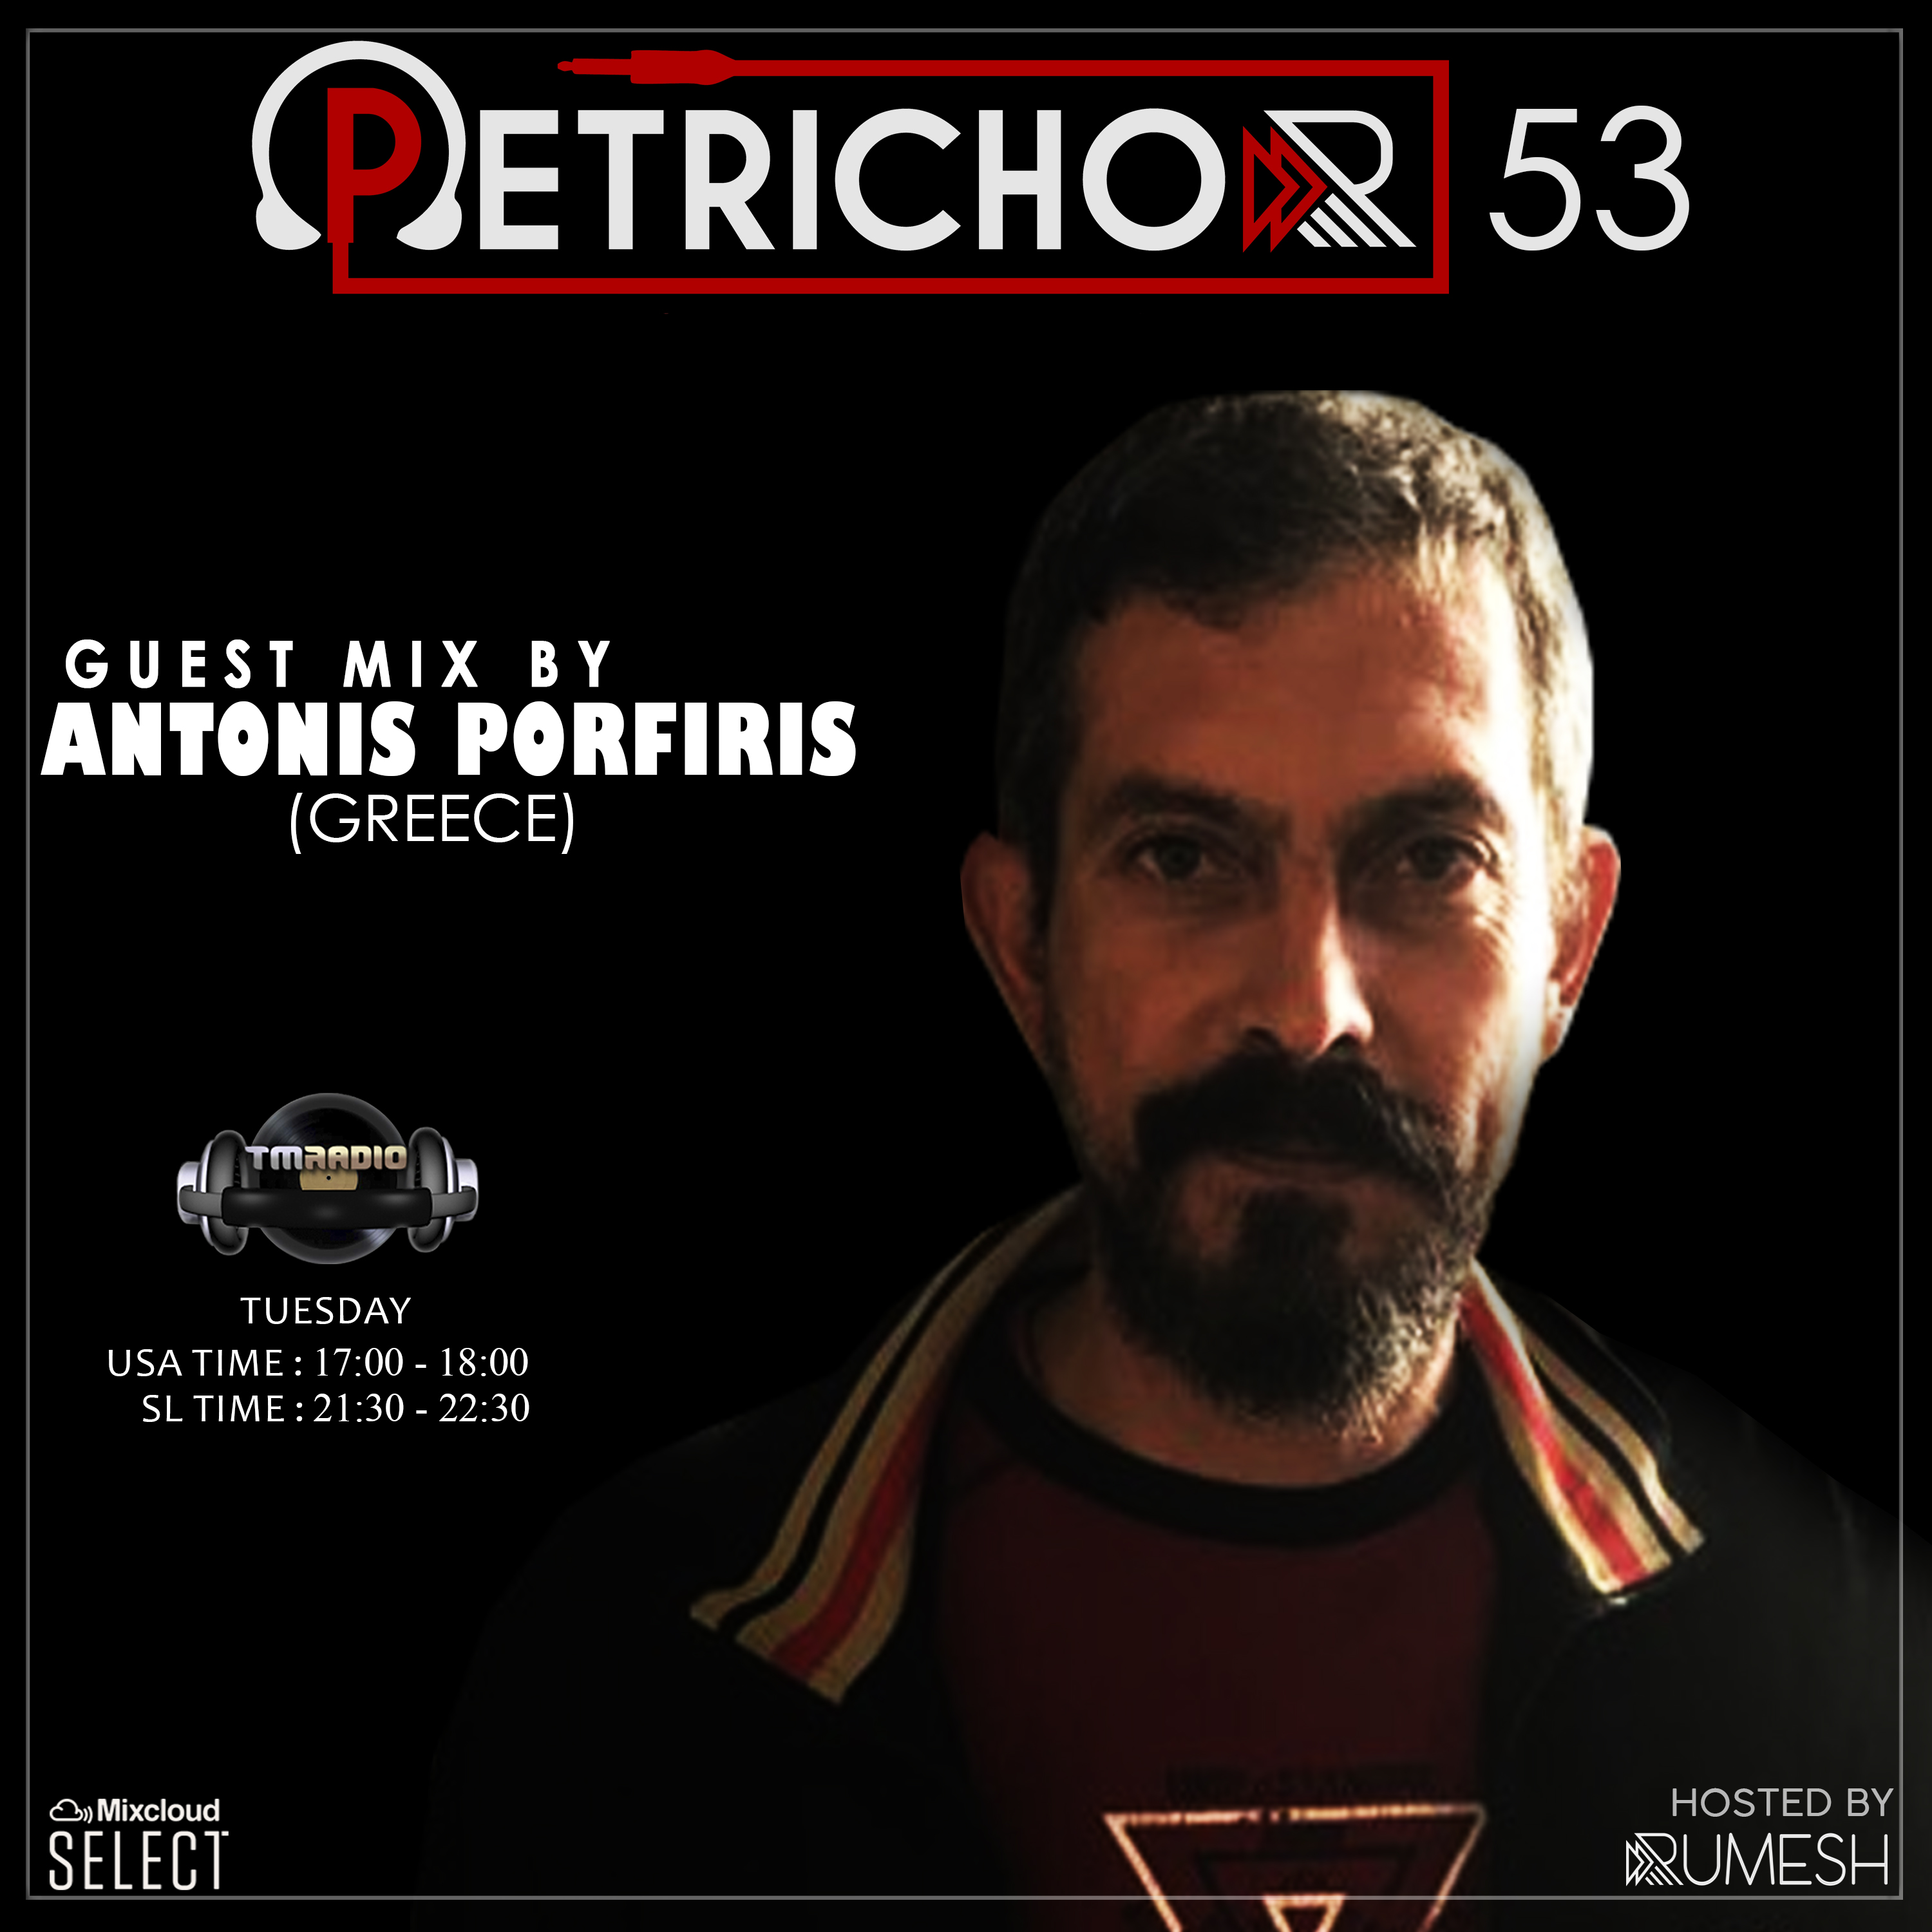 Petrichor 53 guest mix by Antonis Porfiris (Greece) (from November 12th, 2019)